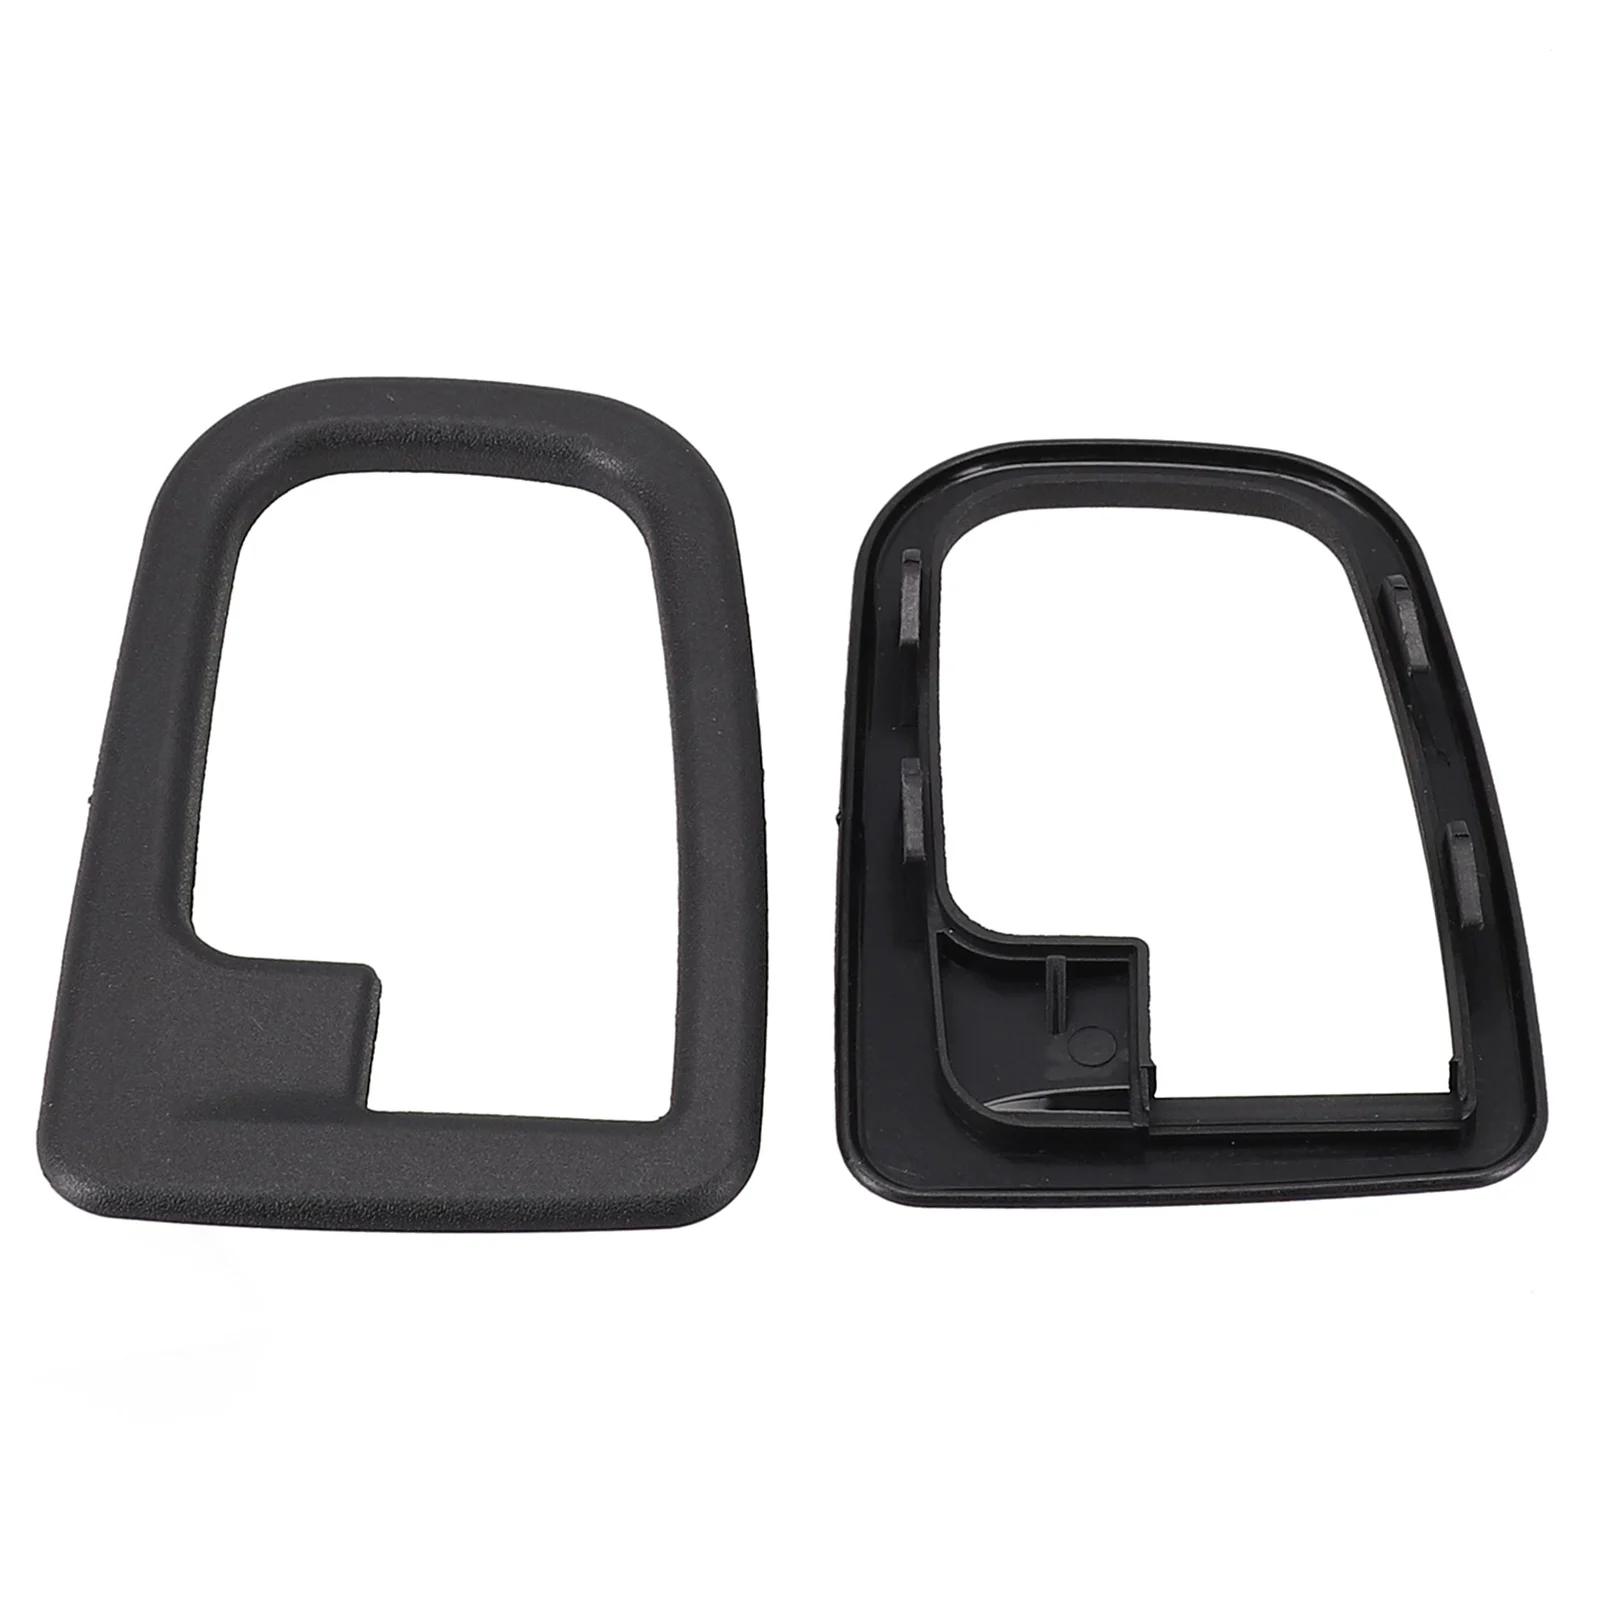 Direct Fit Interior Door Handle Covers for BMW 3 E36 Z3 M3 Universal Fitment Not Supported OEM Numbers 51228219023 51228219024